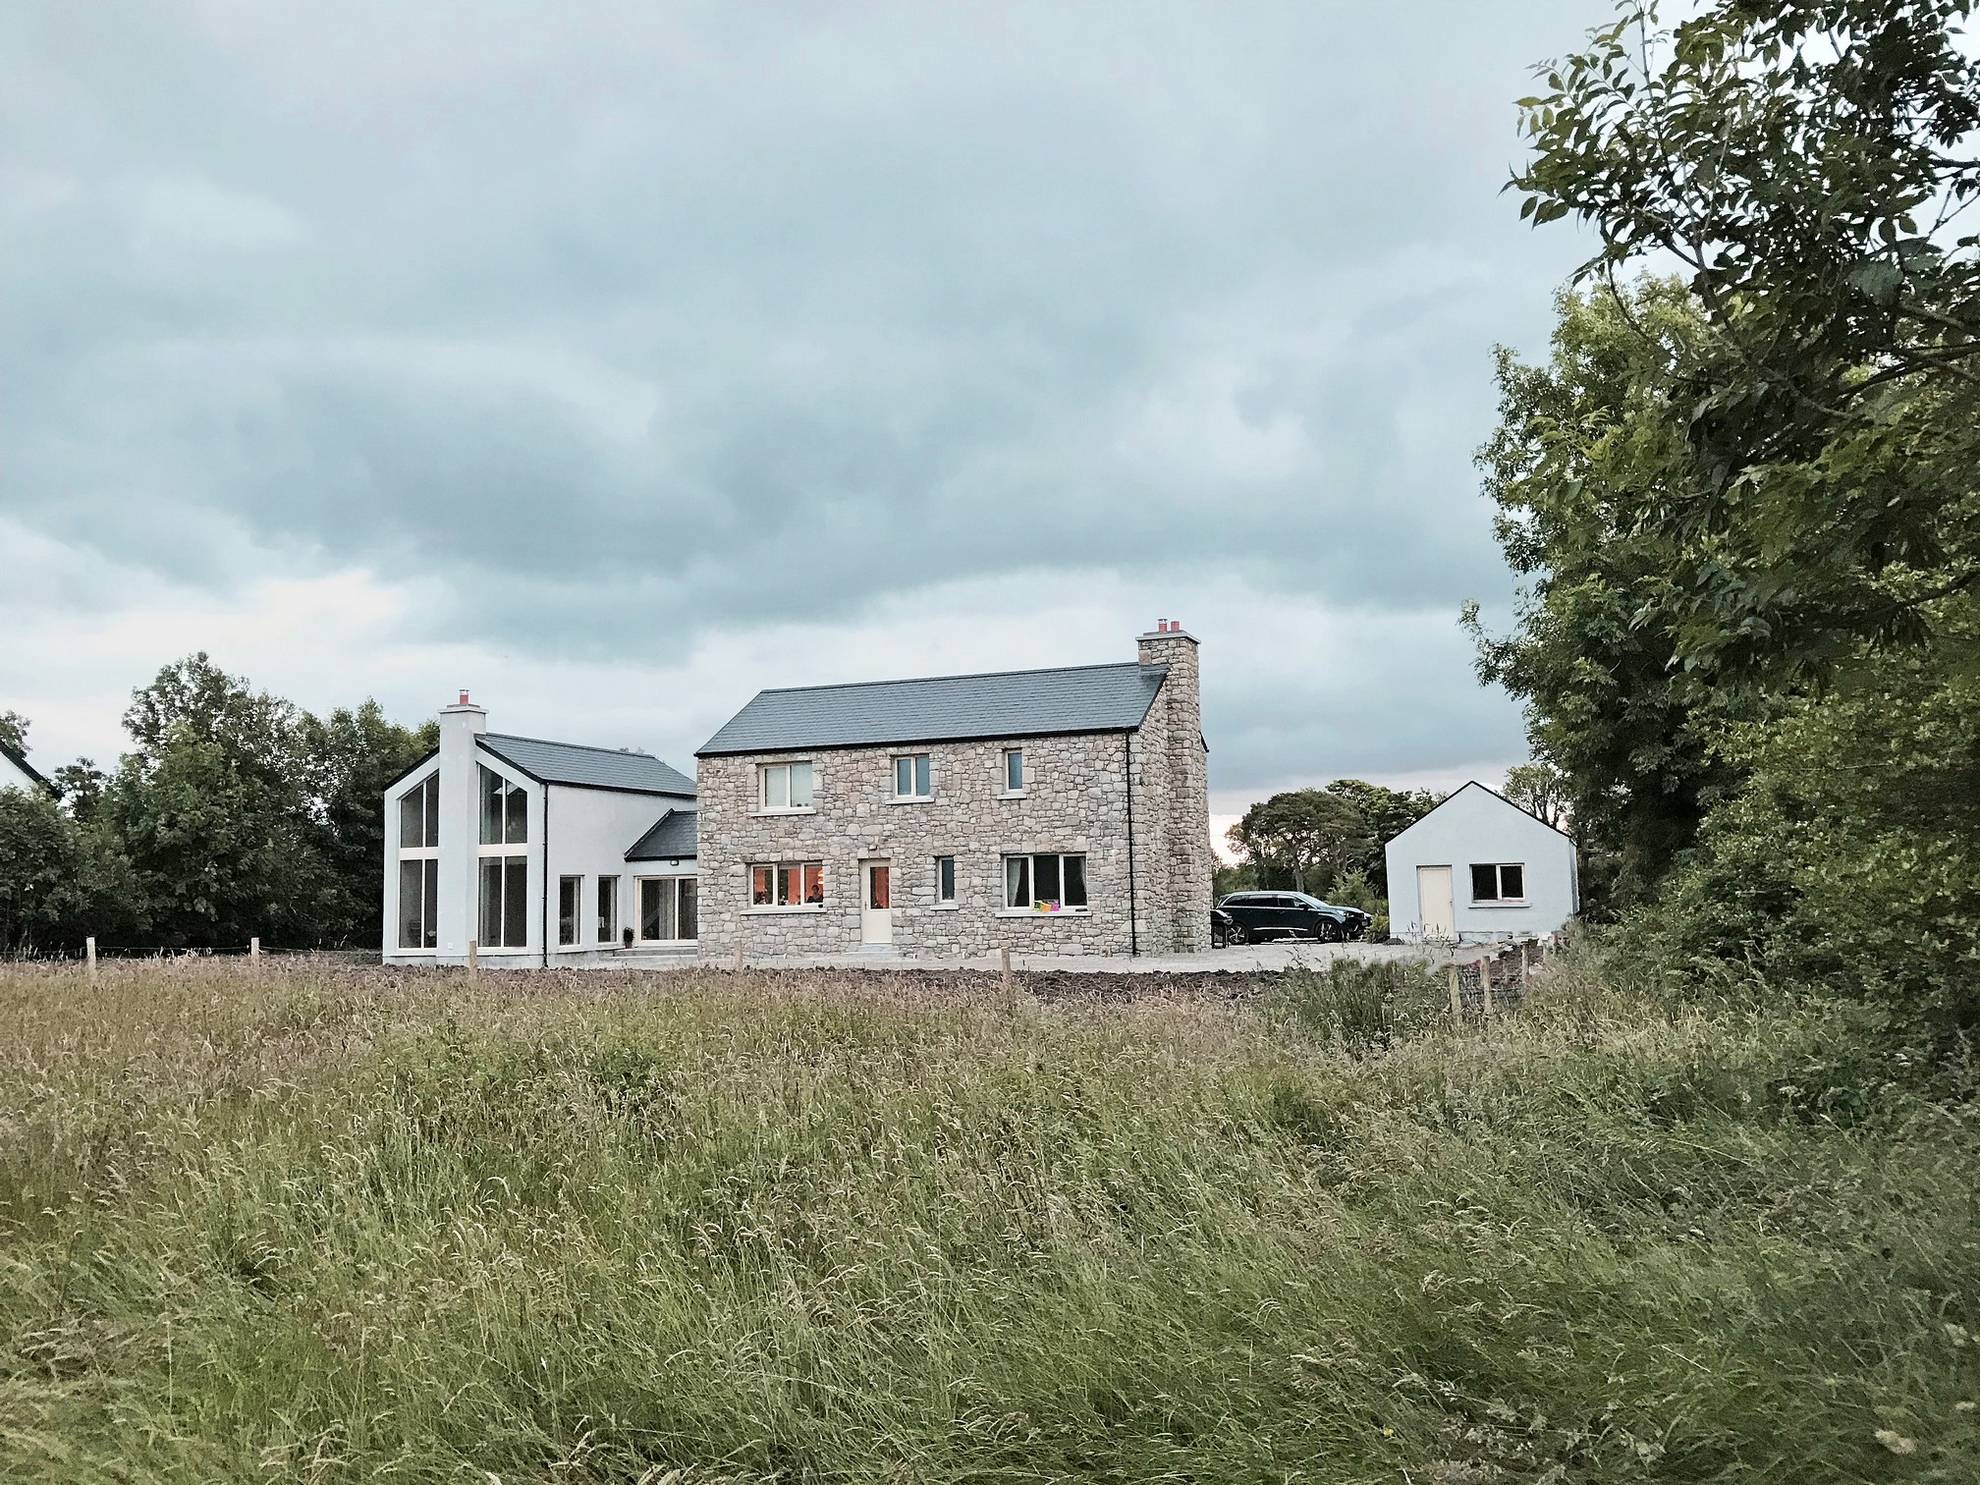 </p> <p>Find your ideal home design pro on designfor-me.com - get matched and see who's interested in your home project. Click image to see more inspiration from our design pros</p> <p>Design by Robin, architect from County Durham, North East</p> <p>#architecture #homedesign #modernhomes #homeinspiration #selfbuilds #selfbuildinspiration #selfbuildideas #granddesigns </p> <p>